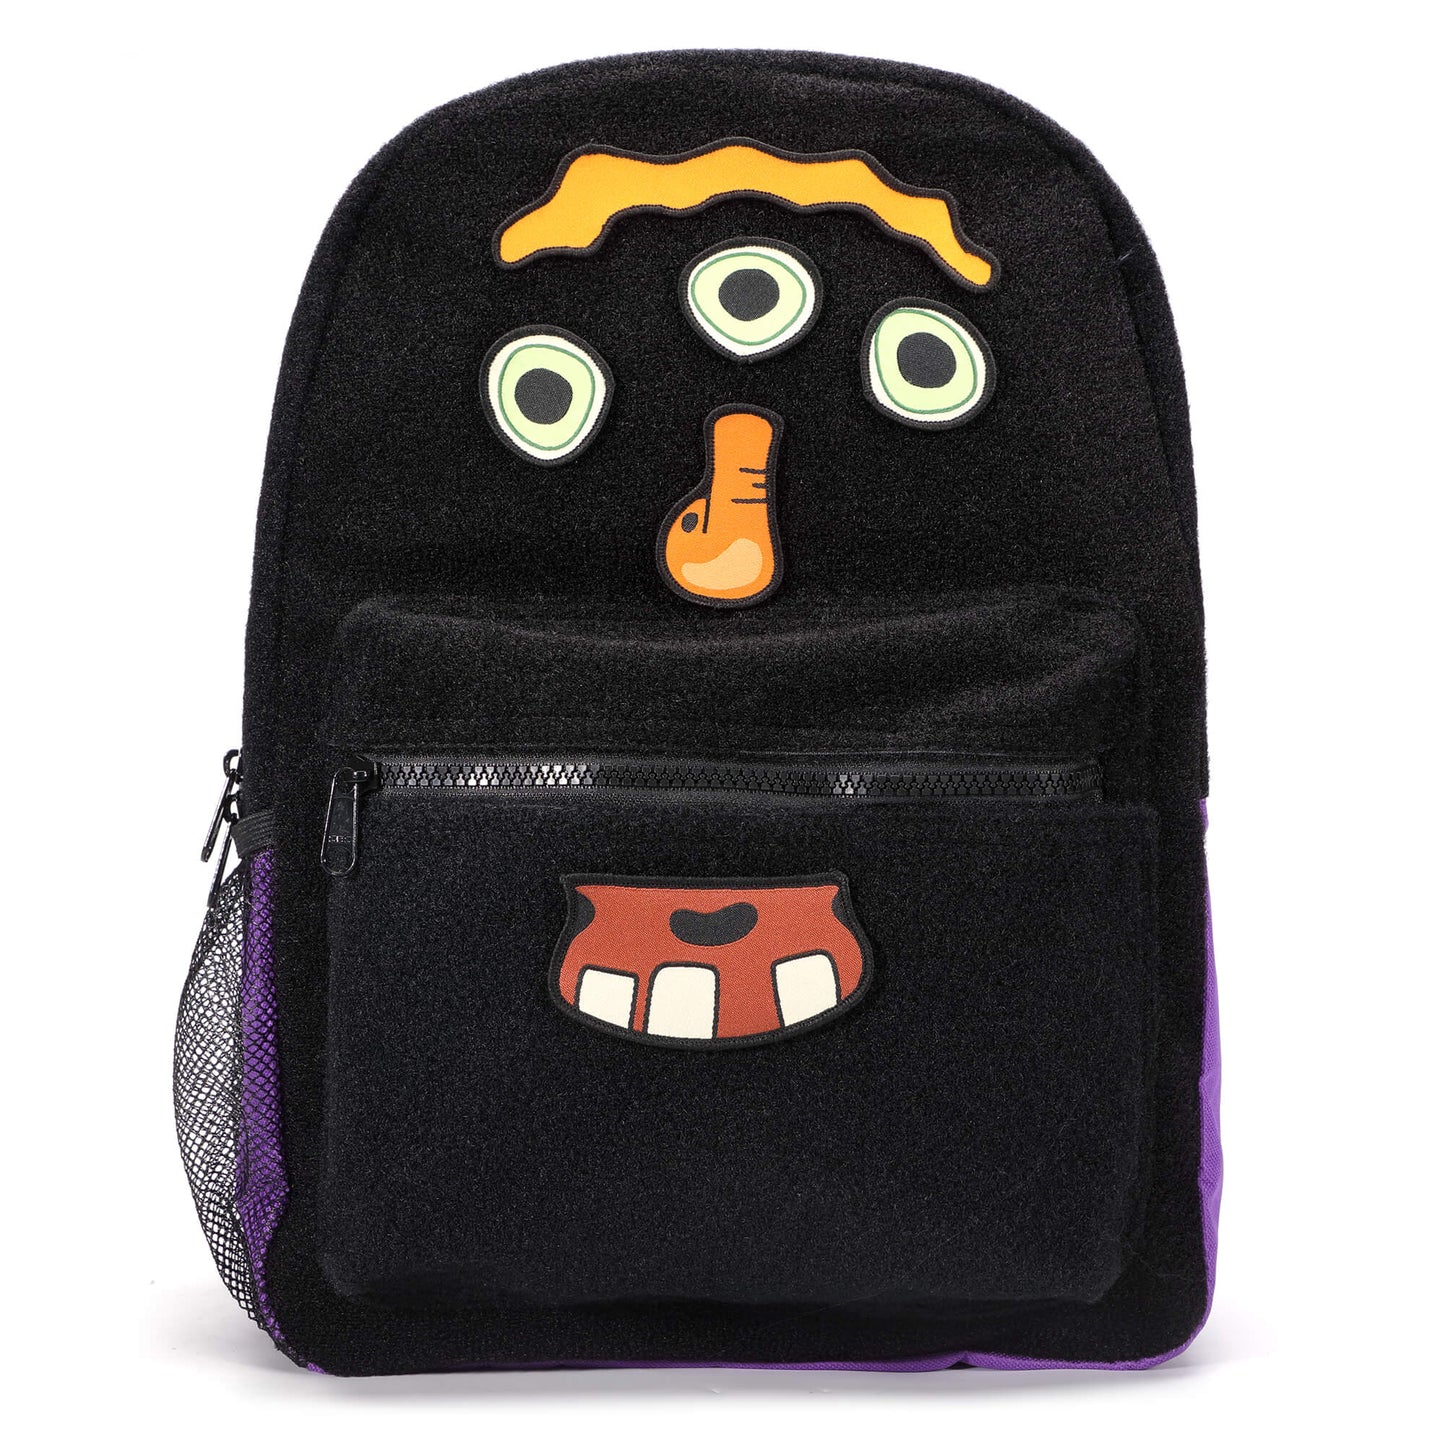 A backpack for kids with a playful and cute monster character design, featuring multiple pockets and a padded back for comfort.